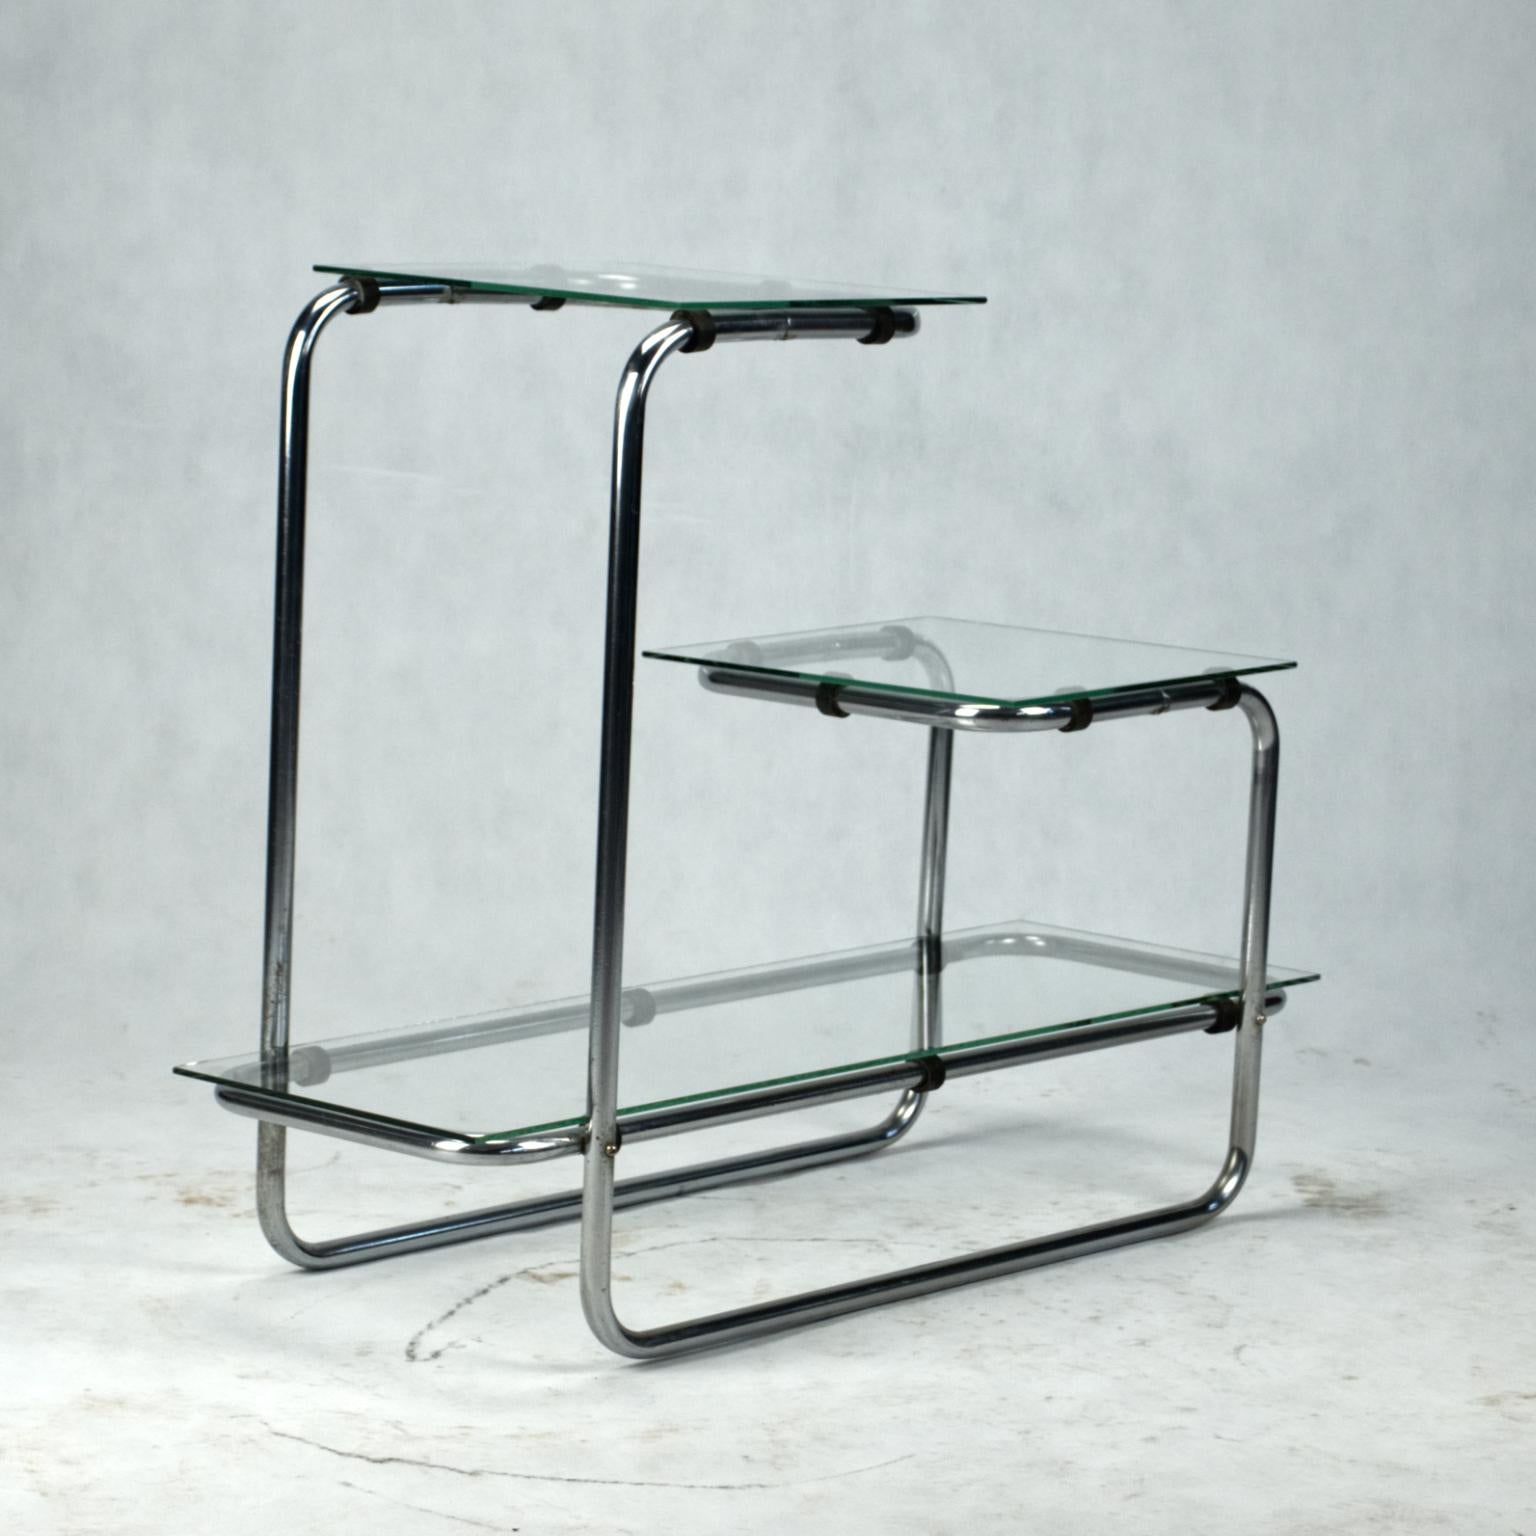 Chrome-plated tubular steel étagère made in the 1930s with glass shelves. Chrome plating is in original condition.